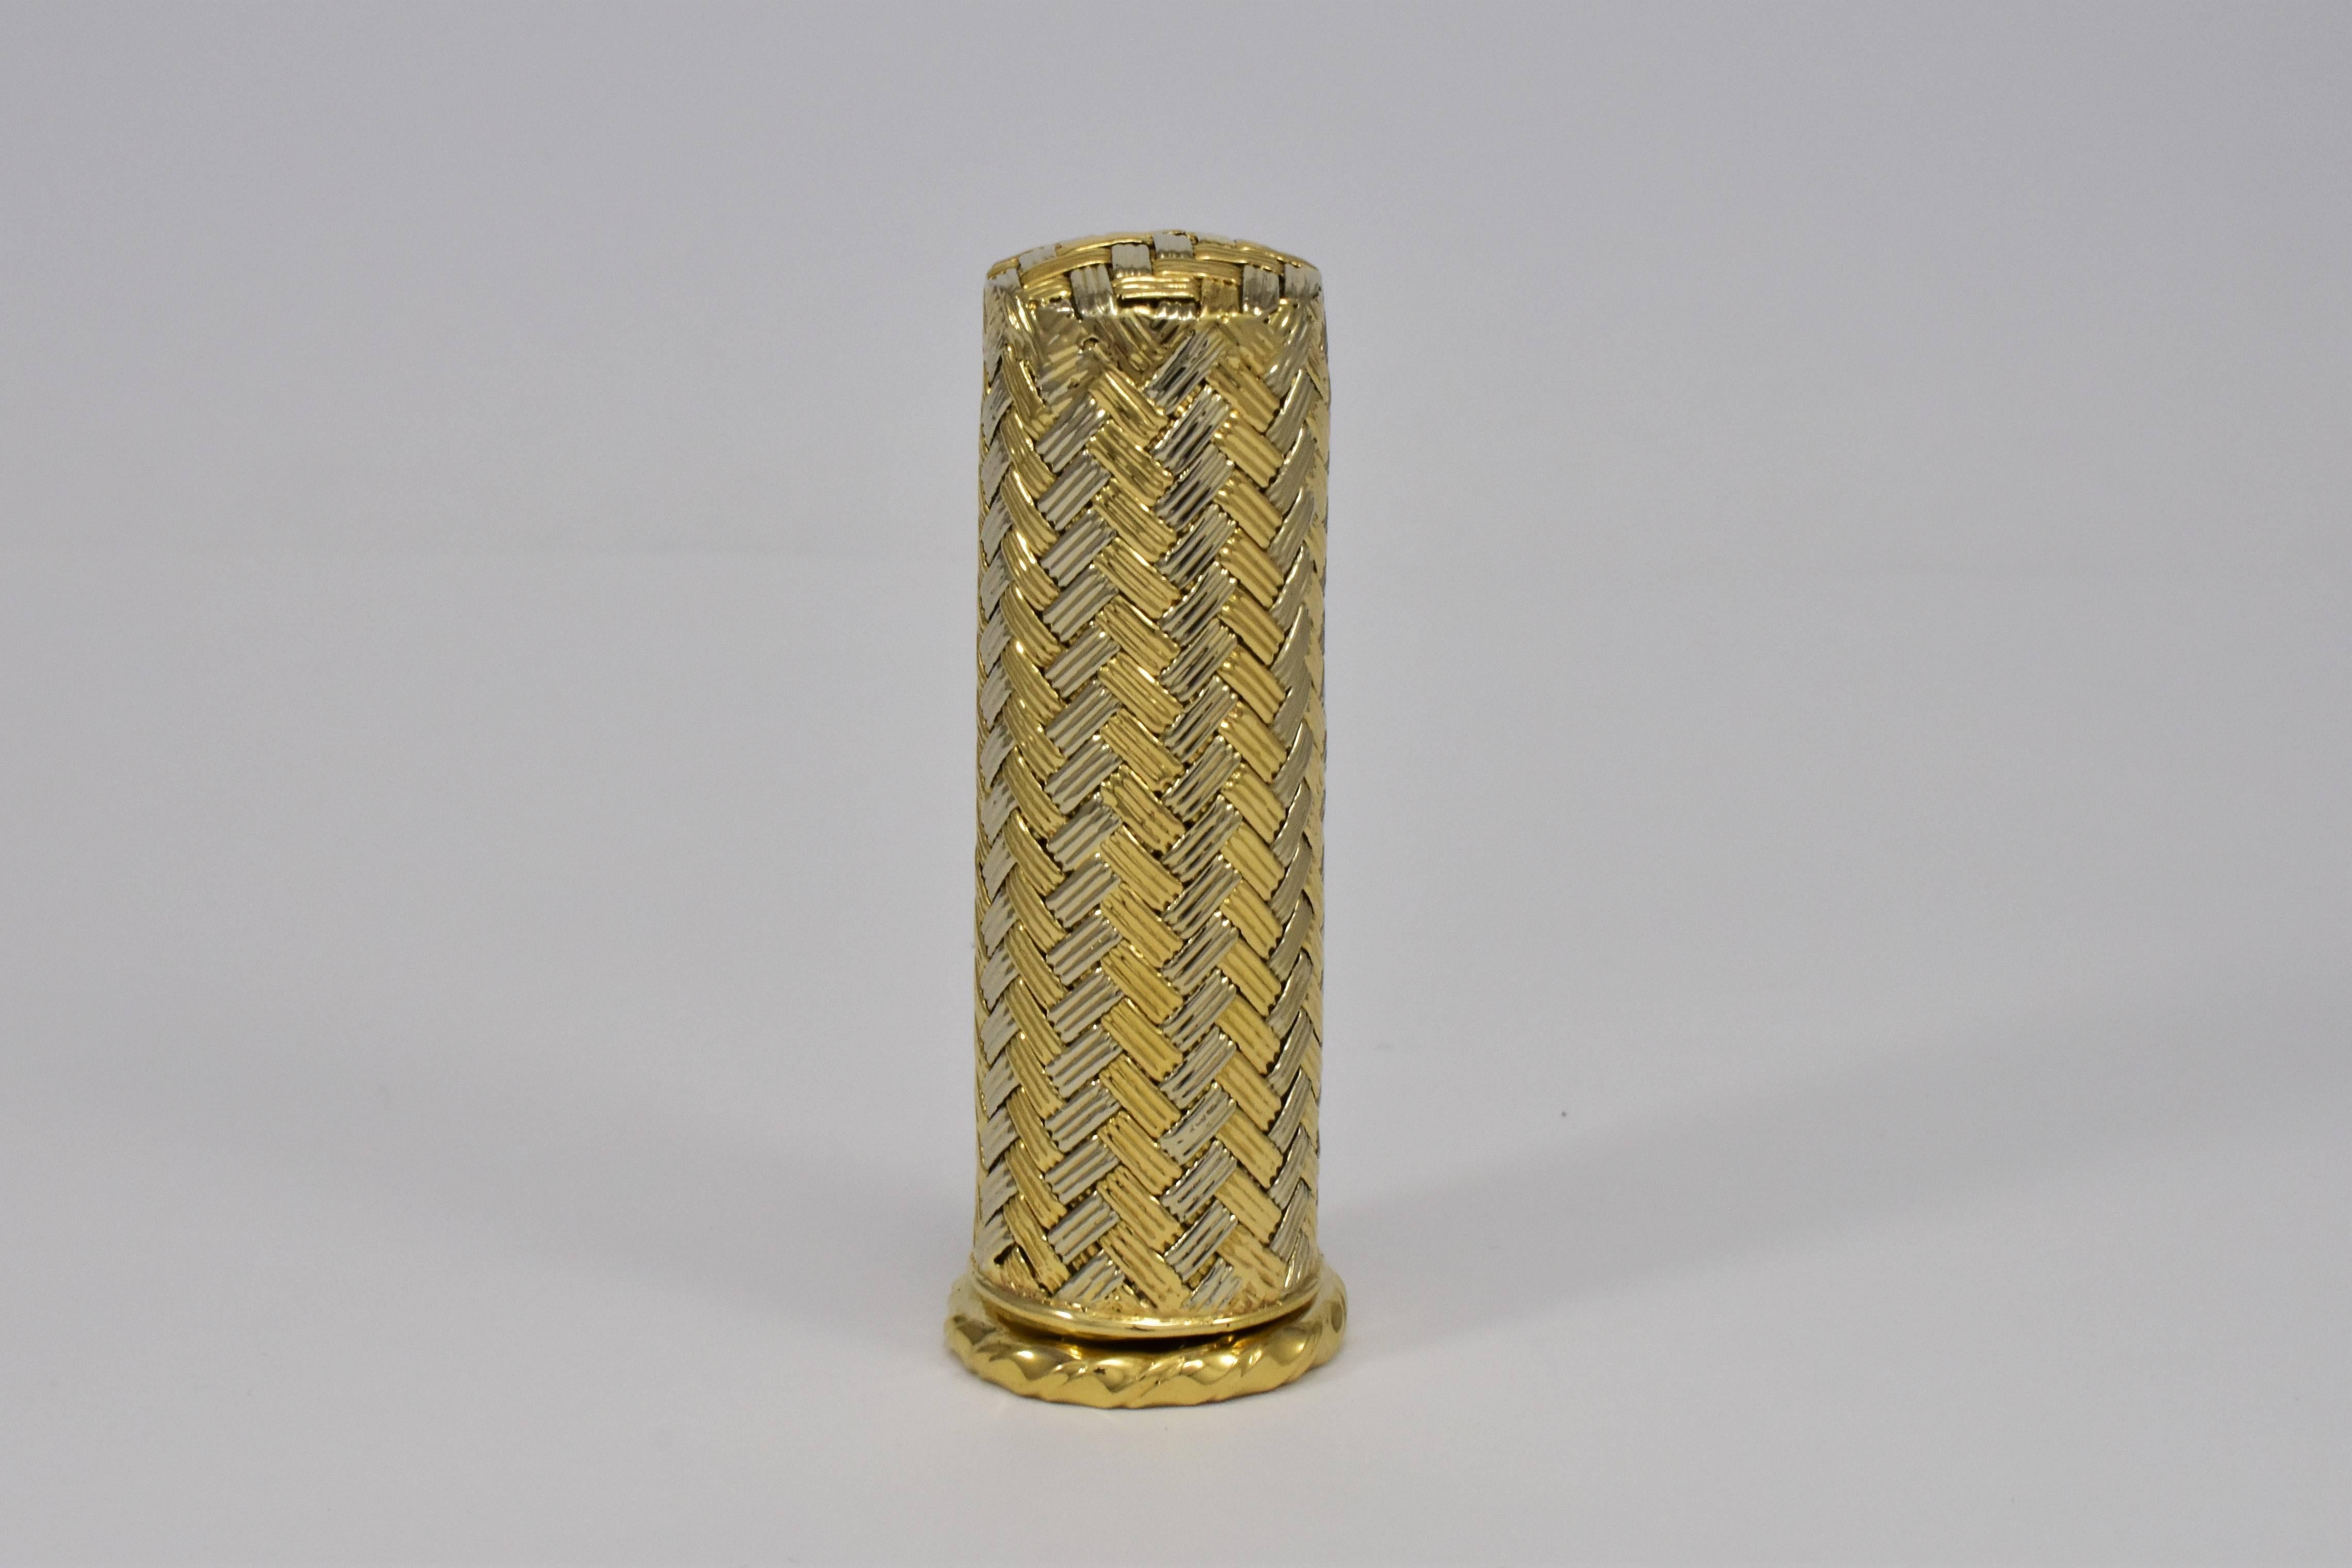 A lipstick cover with a woven detail design combining two colours of yellow and white gold. A chic women's accessory of the 1960s. This small gold container could be re-purposed as a pill box or other precious keepsake box. Made in Italy. This